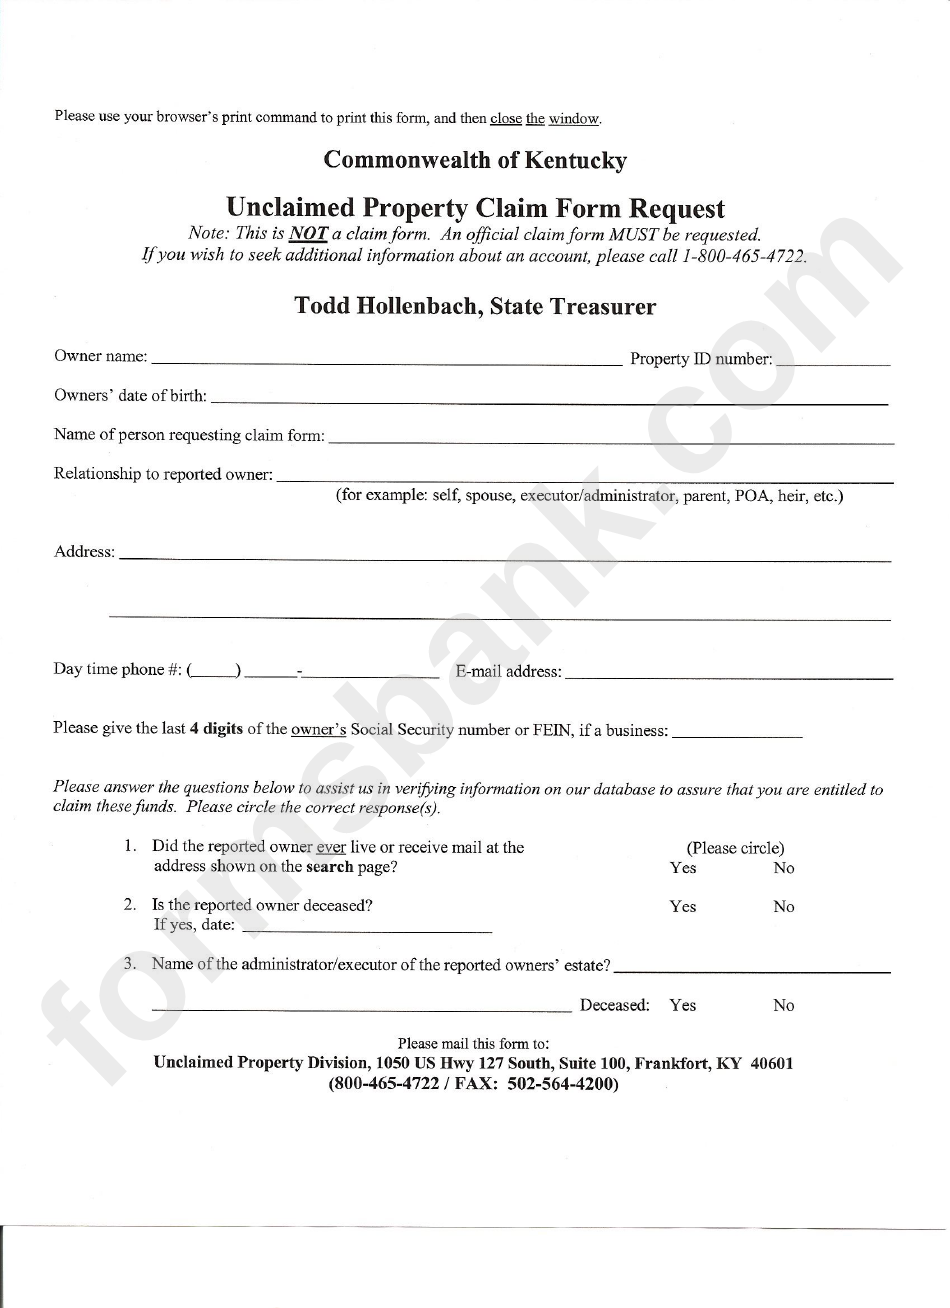 Unclaimed Property Claim Form Request - Commonwealth Of Kentucky